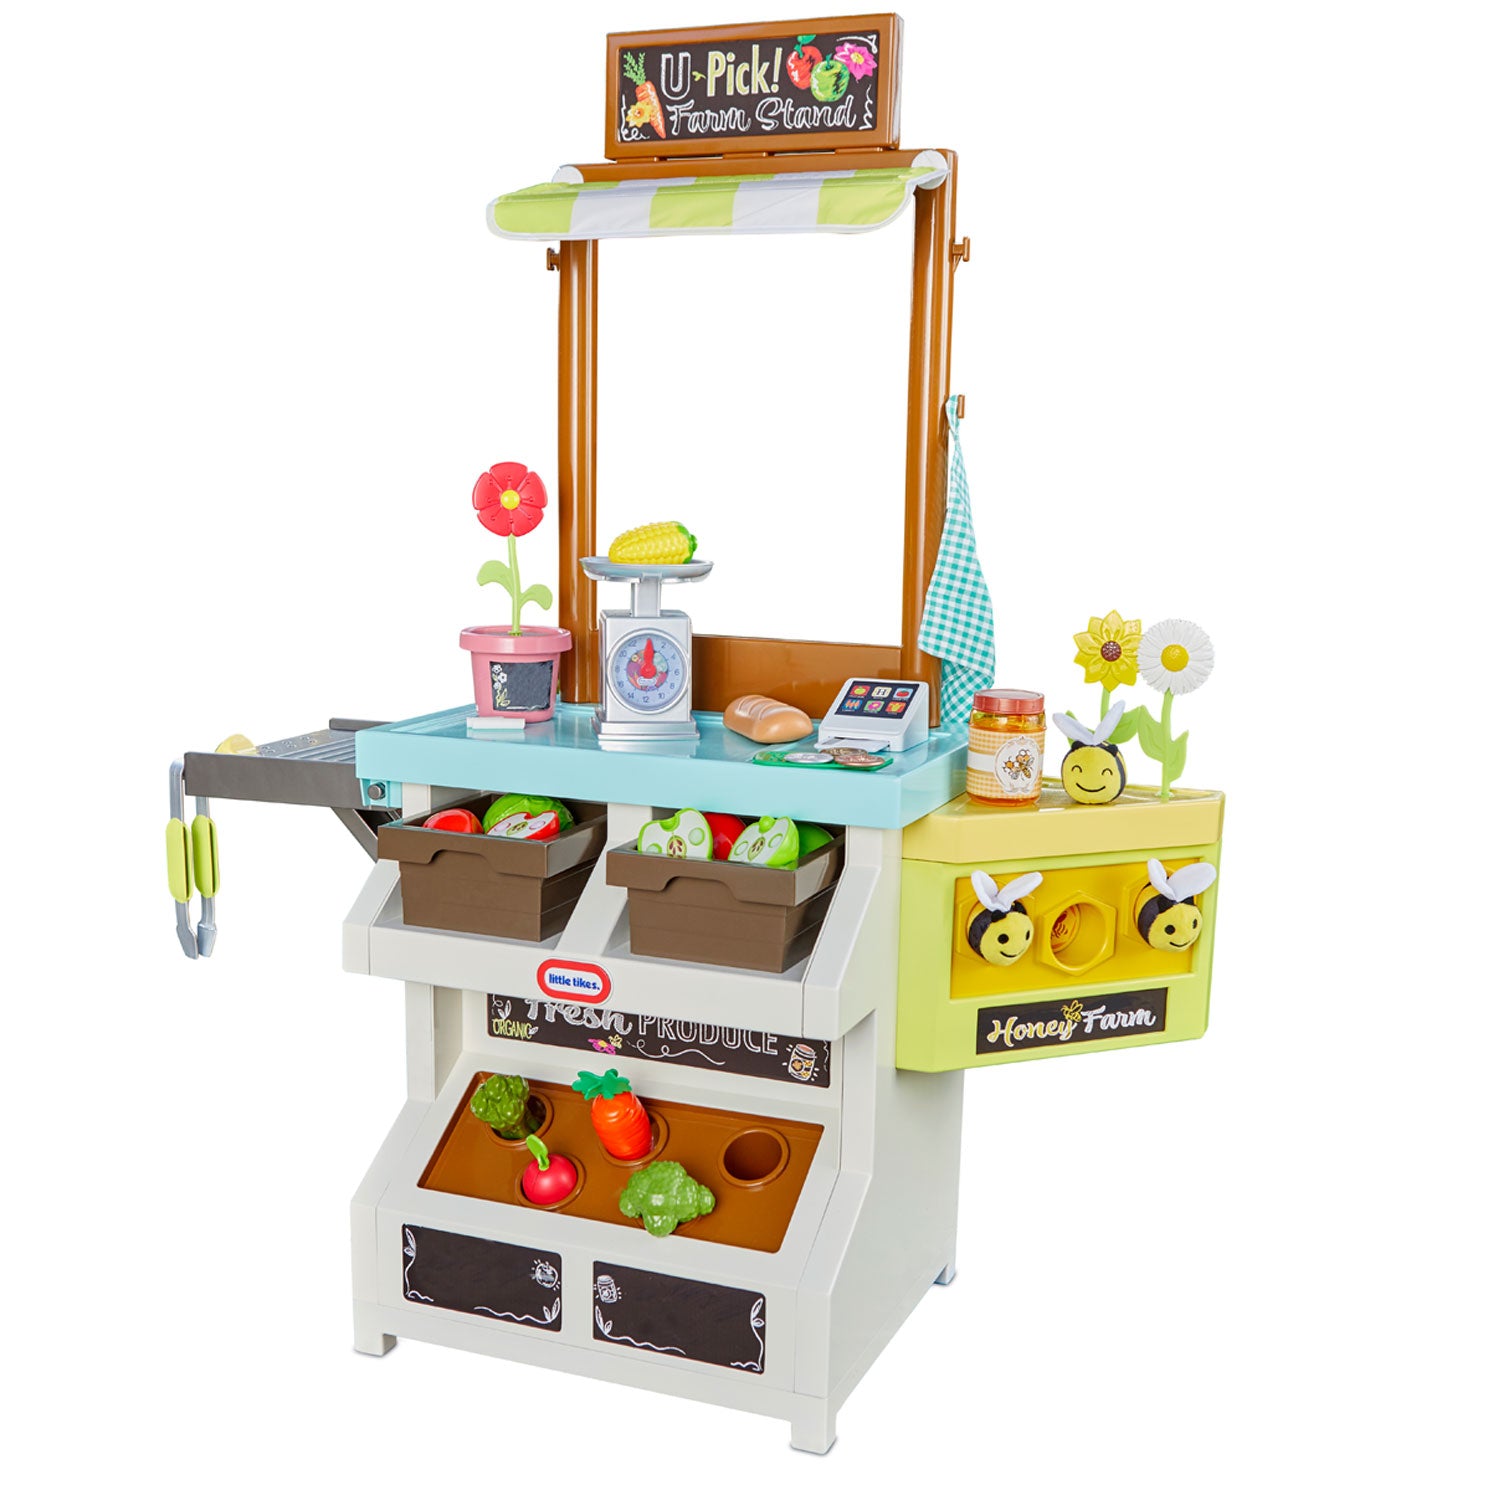 Wooden Farmers Market Stand - Kid's Playroom Furniture Grocery Stand for Pretend Play (30+ Pieces) - Includes Fruit, Chalkboard, Chalk